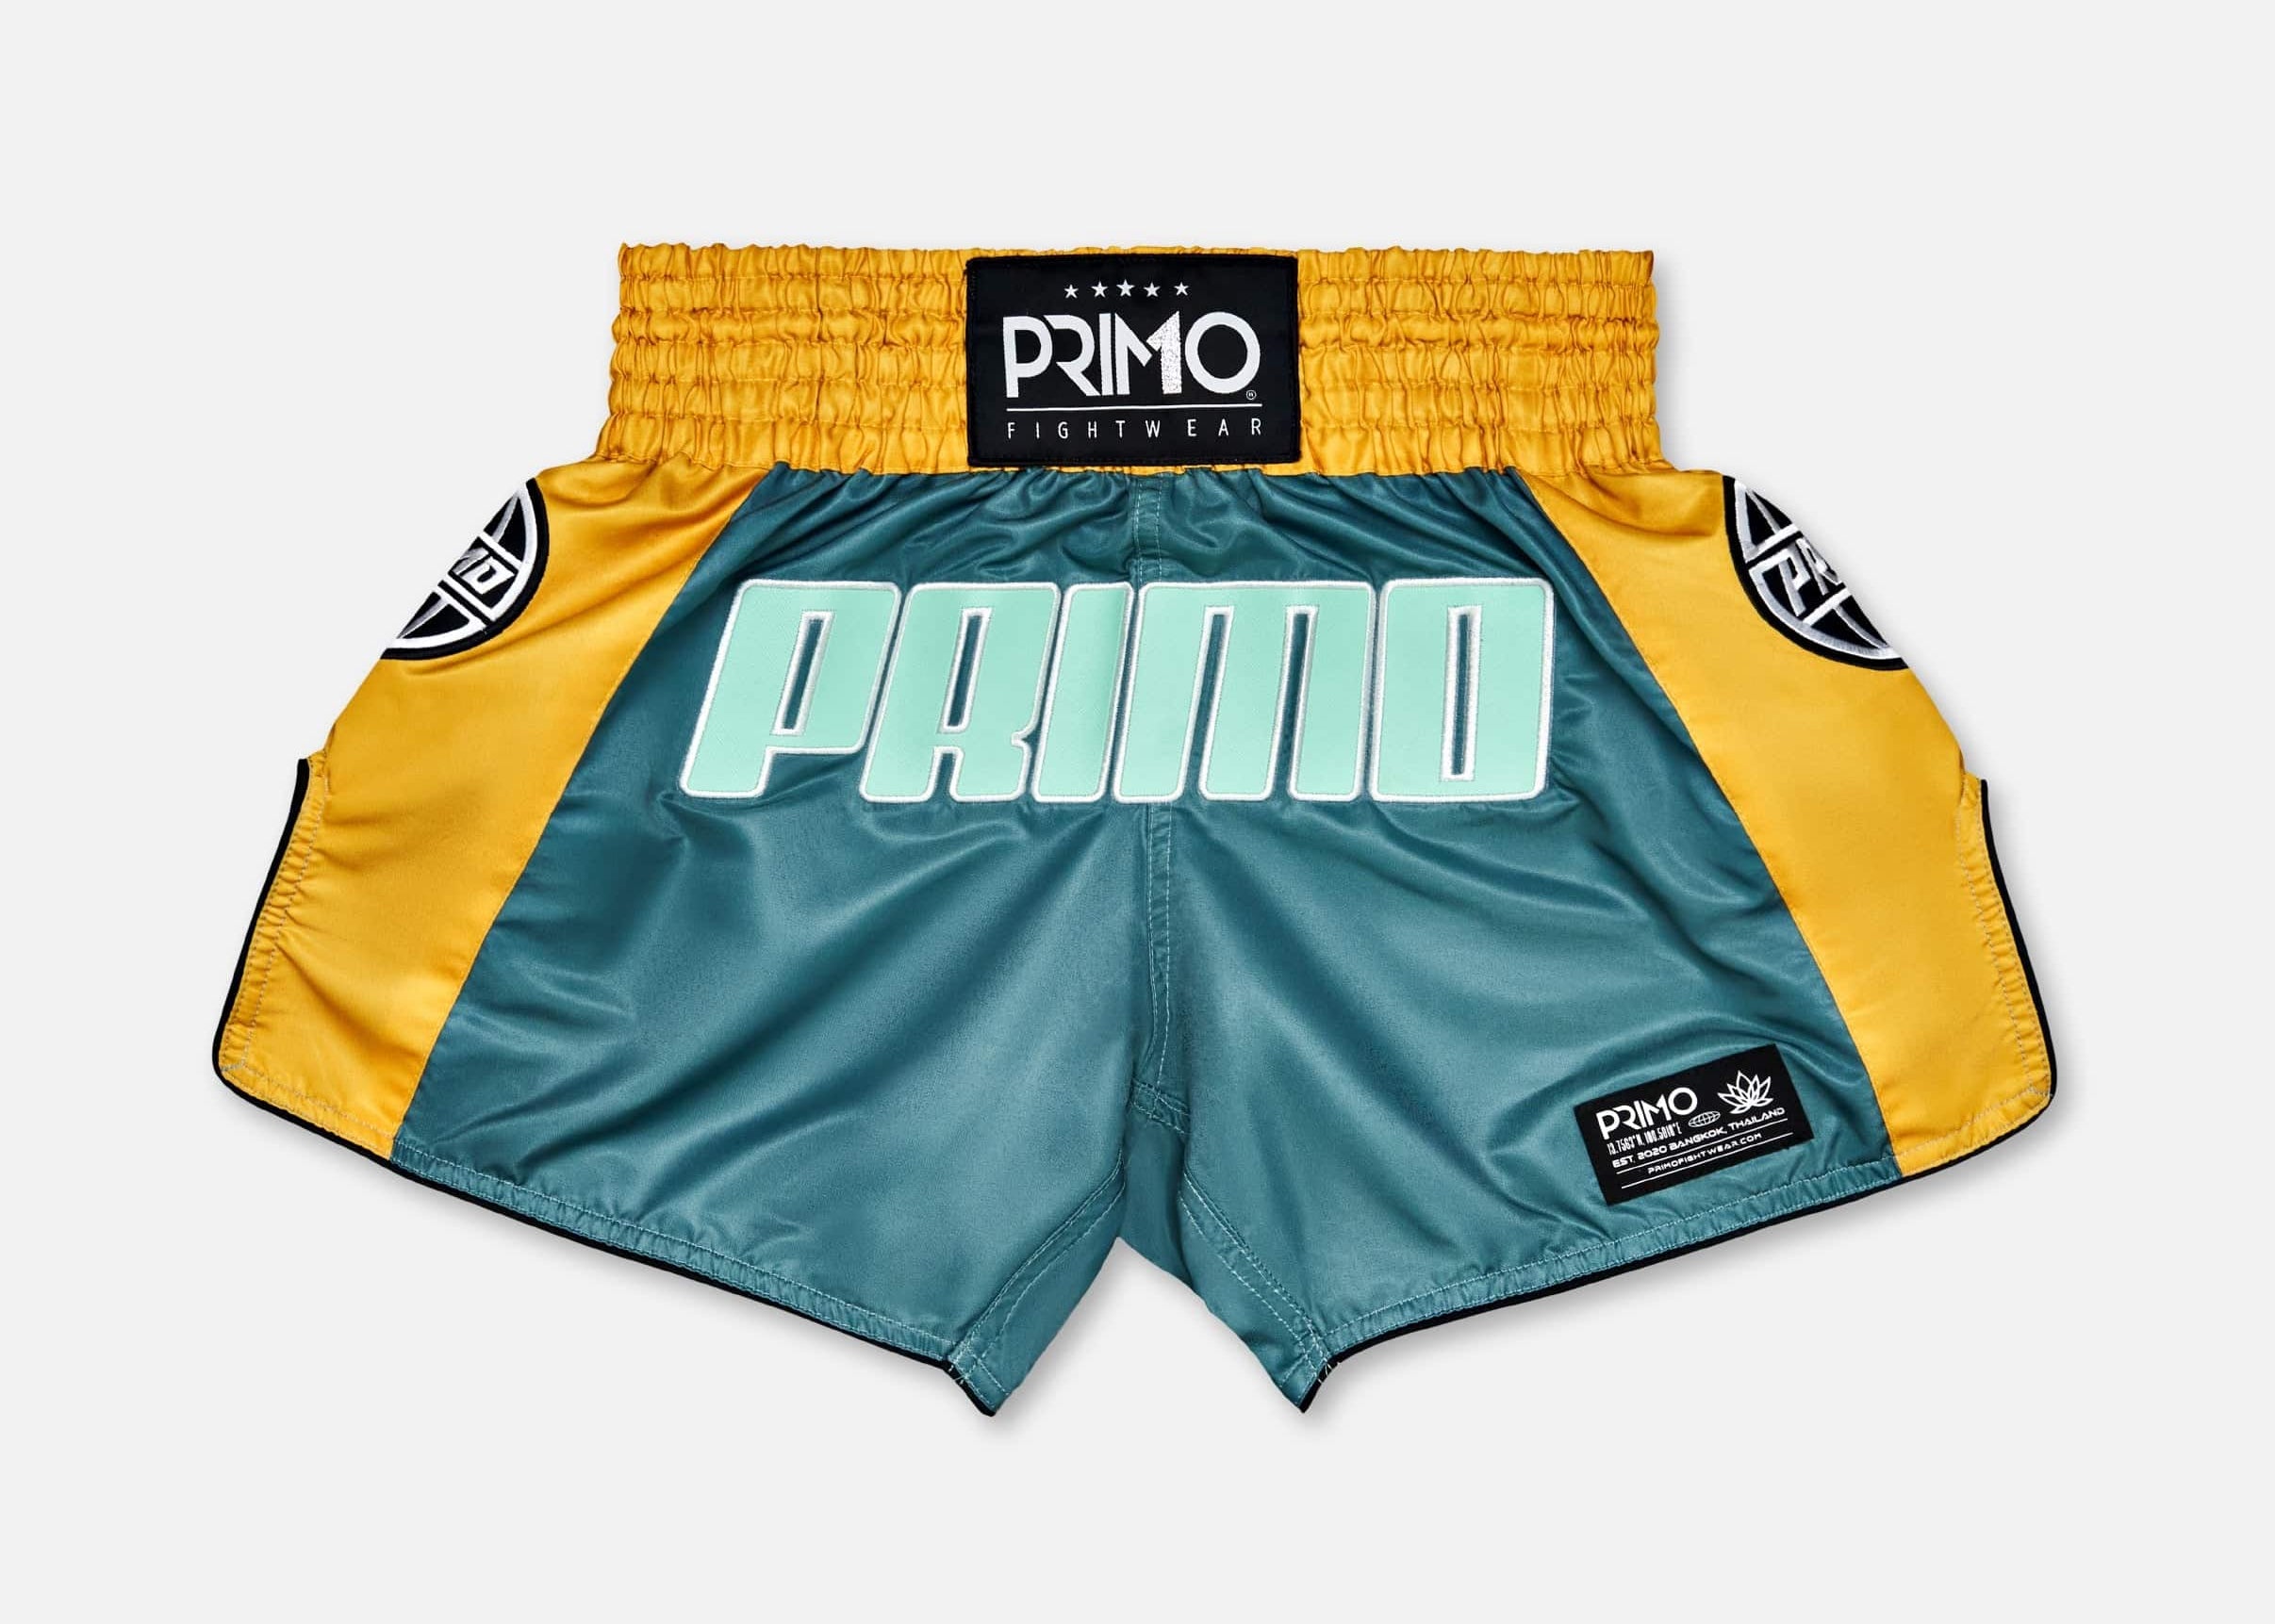 Primo Fight Wear Official Muay Thai Shorts - Trinity Series -  Teal